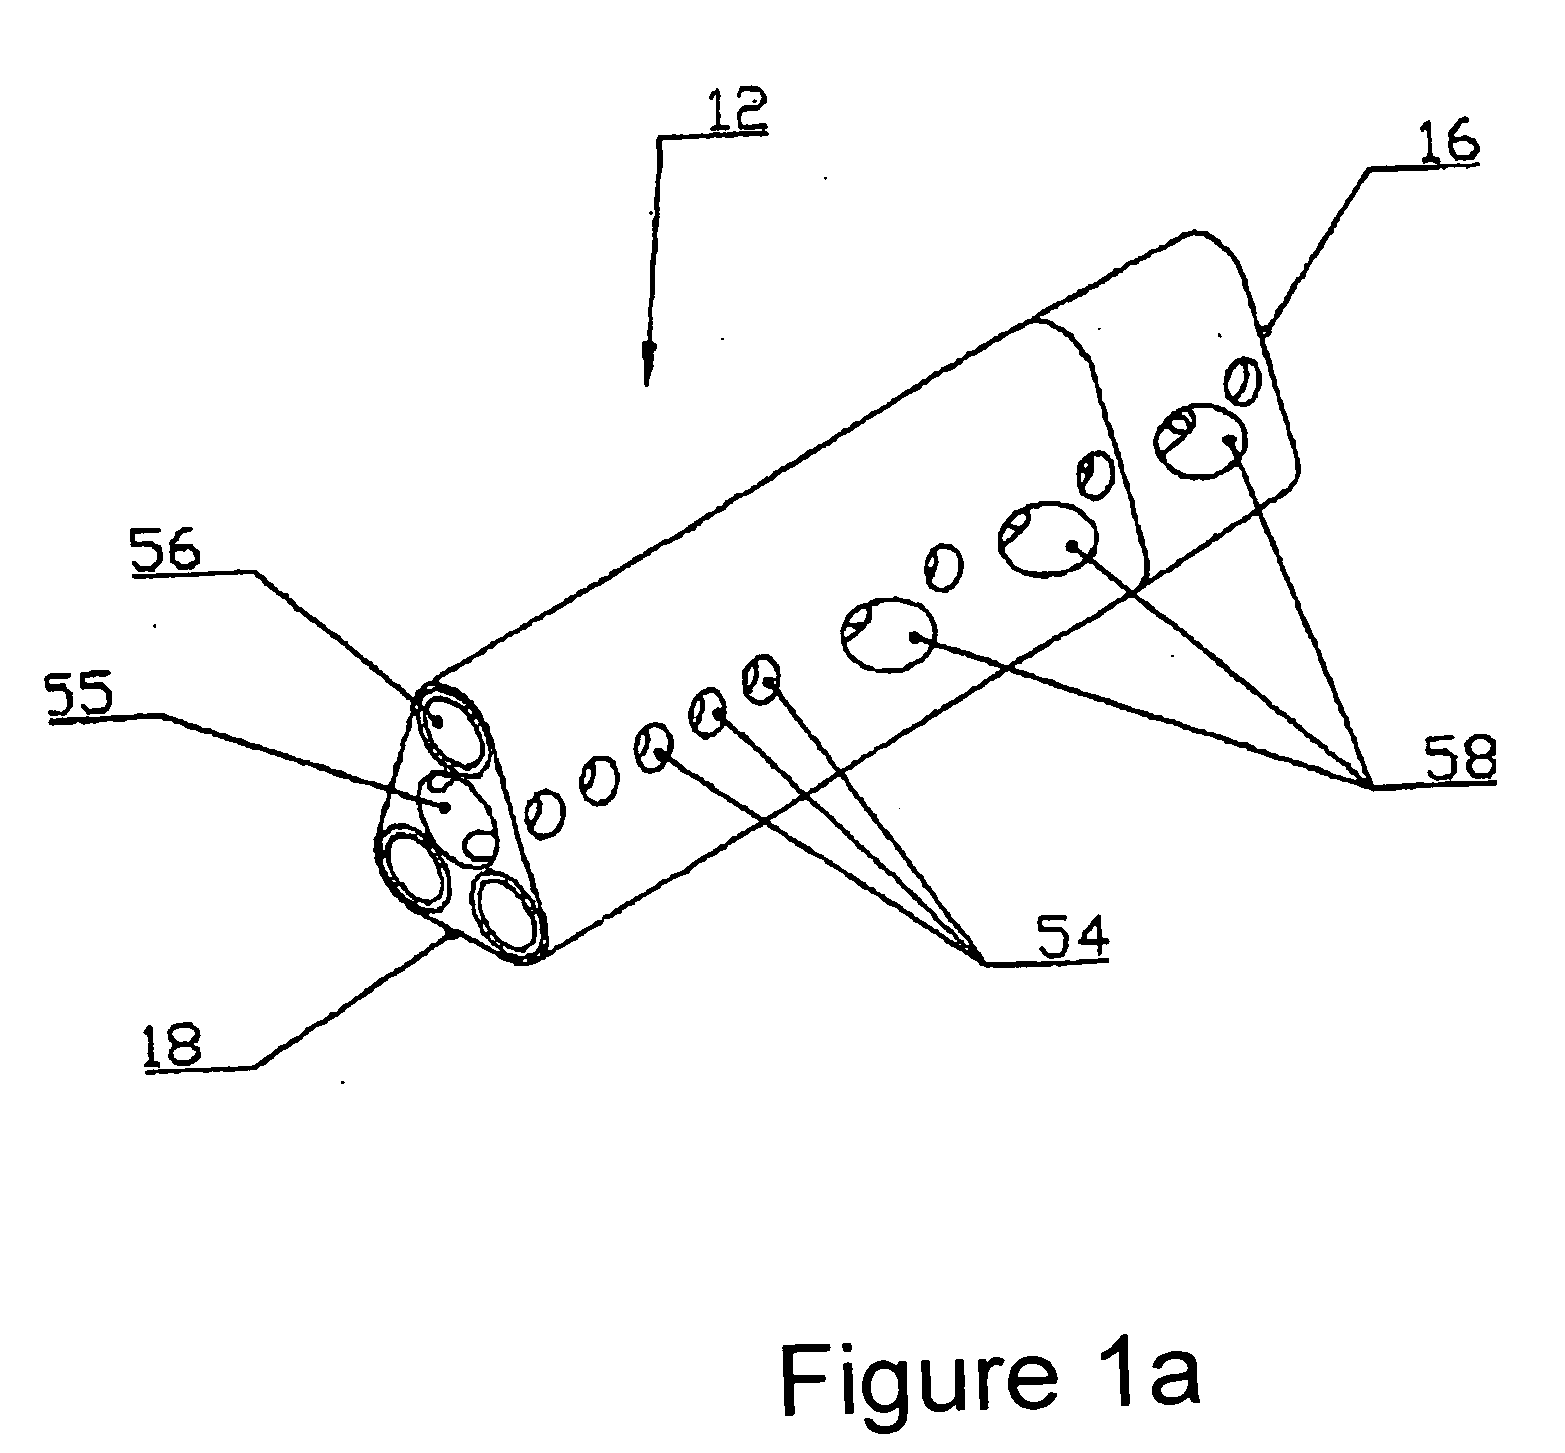 Hybrid interlocking proximal femoral fracture fixation device and an operative technique of introducing the same